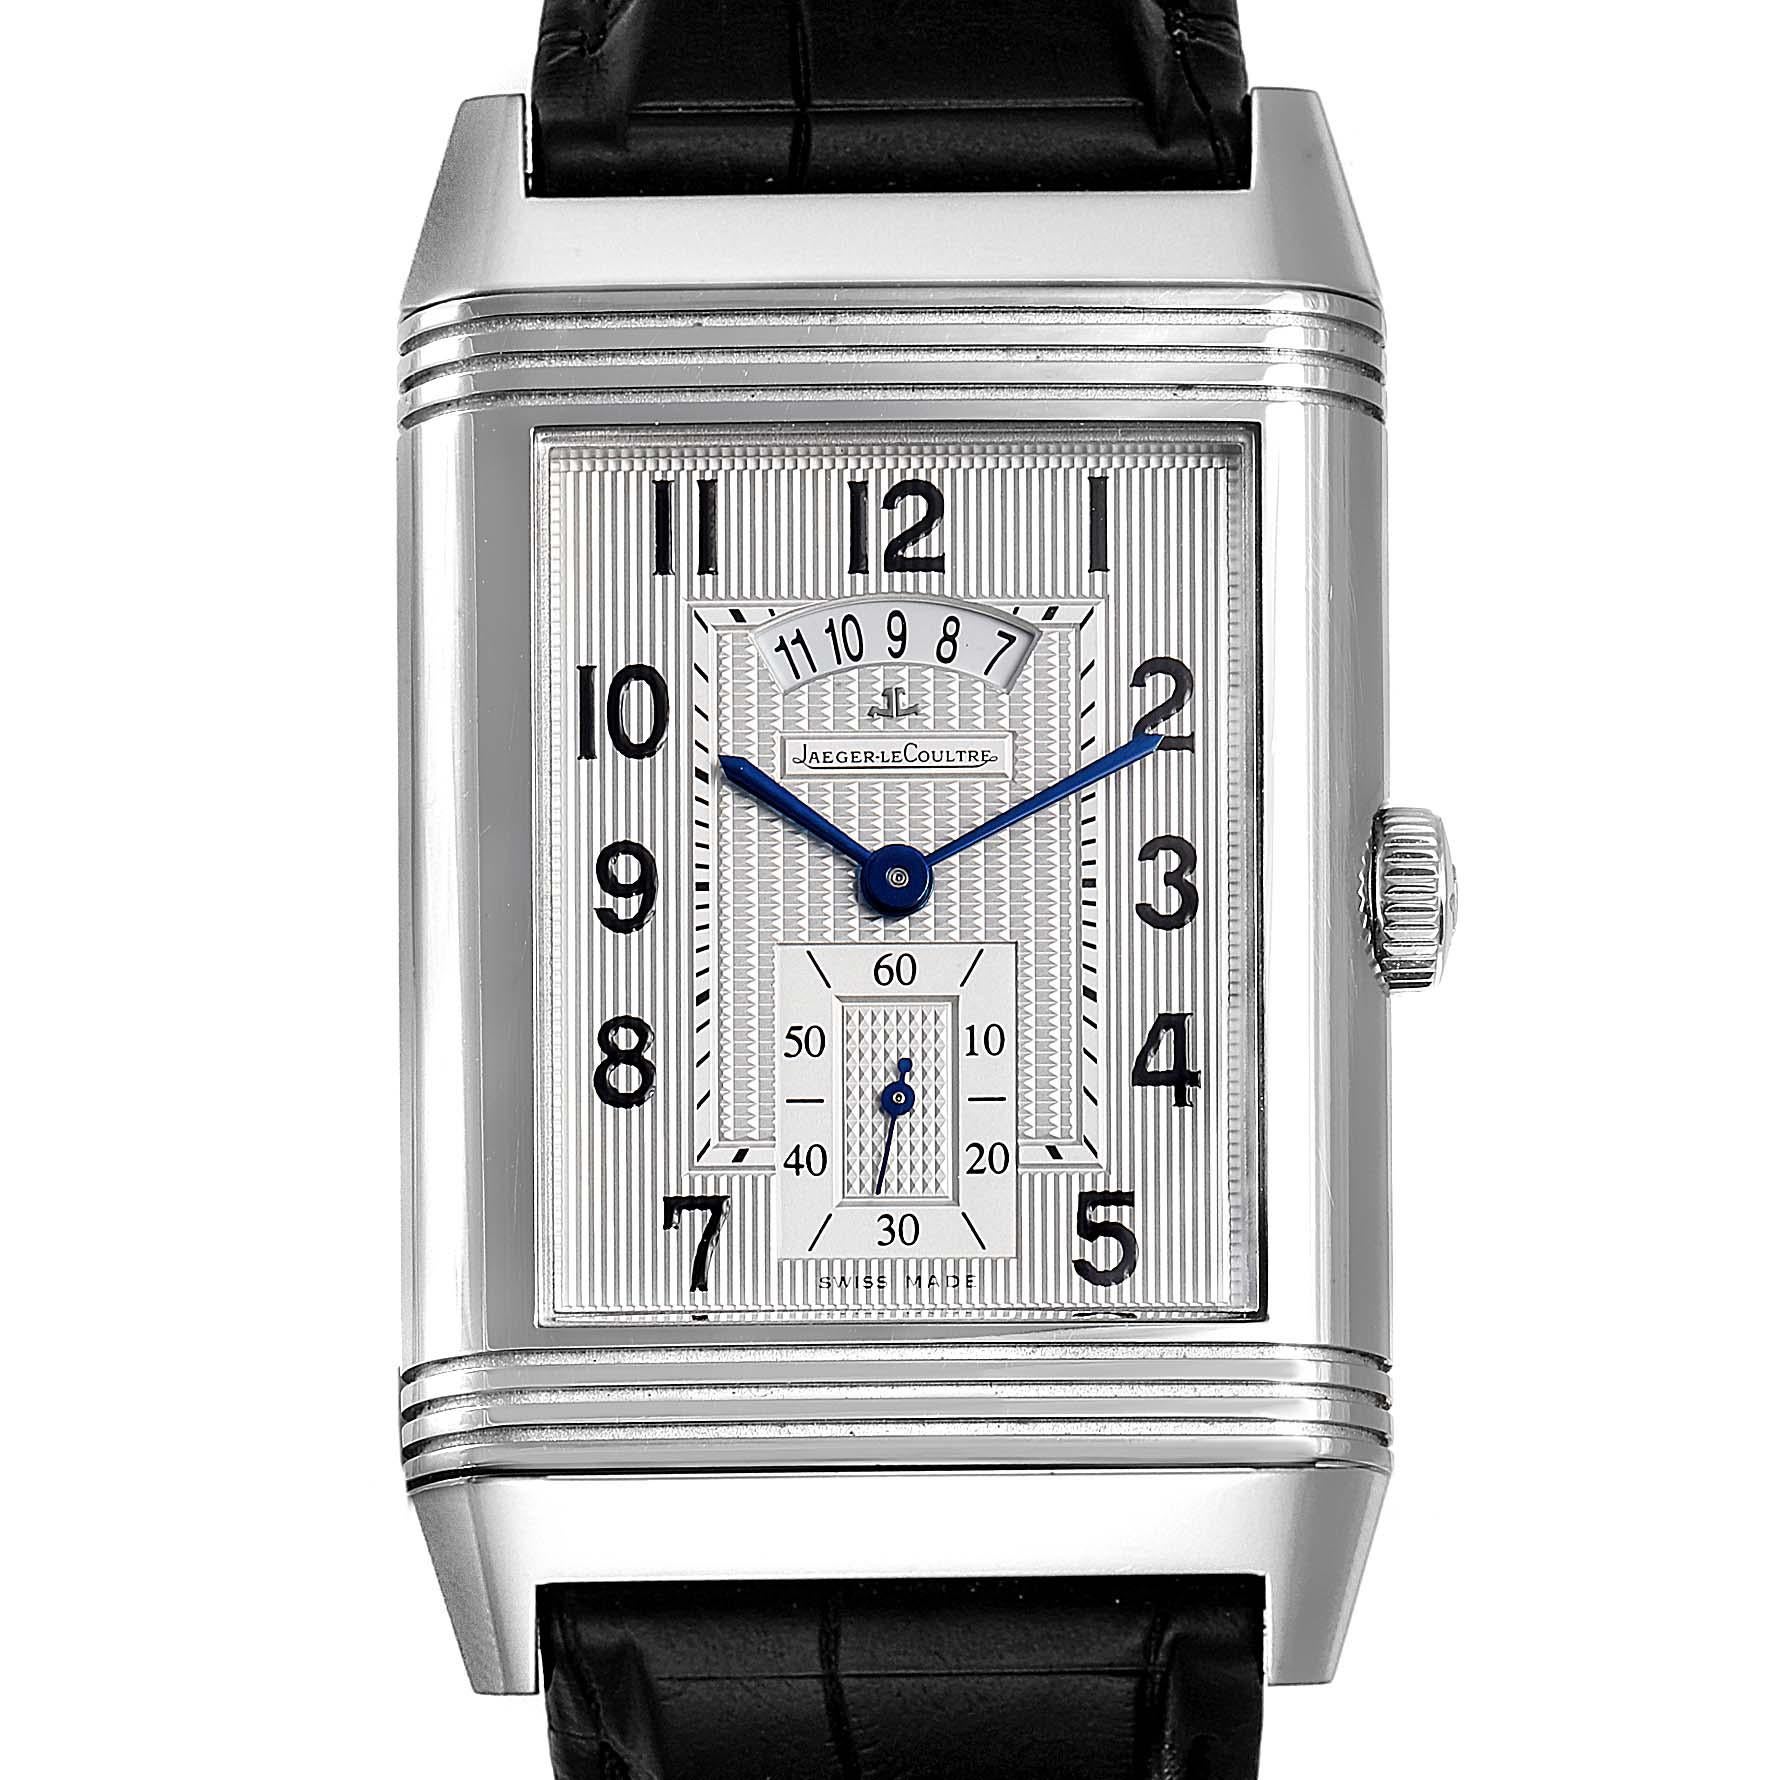 Jaeger LeCoultre Grande Reverso Duodate Limited Edition Watch 274.8.85. Manual winding movement. Straight line lever escapement, monometallic balance, adjusted to heat, cold, isochronism and 5 positions, shock protection, self compensating balance